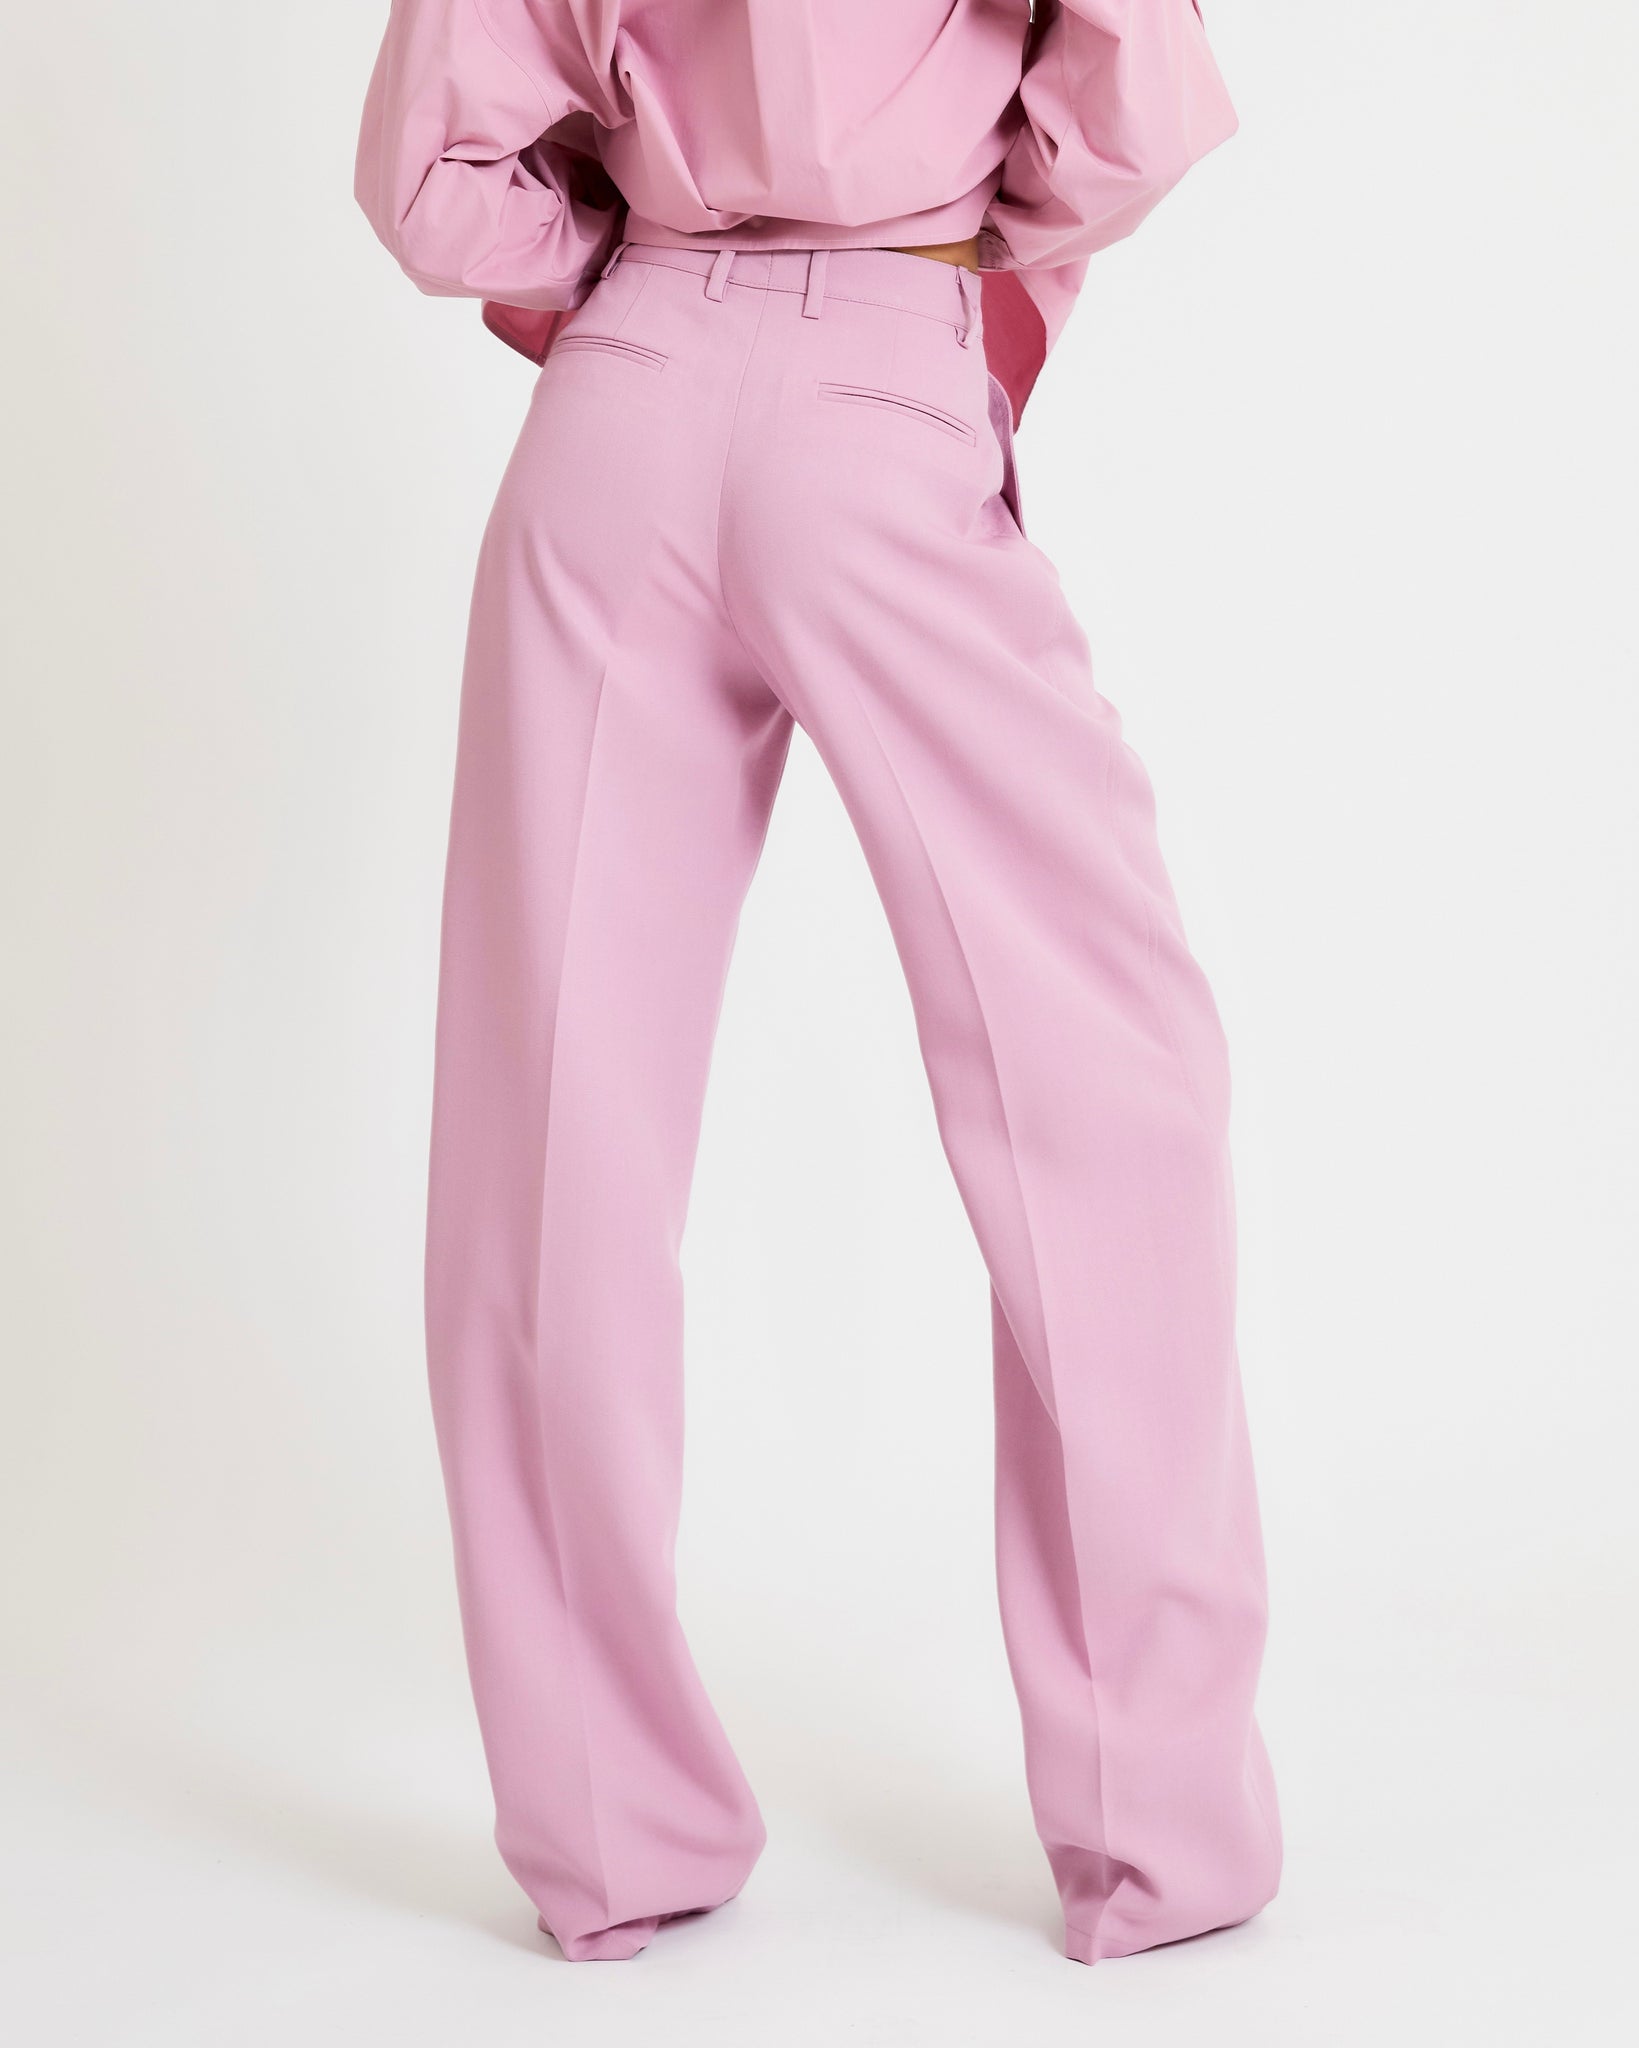 O'CONNOR WIDE-LEG TAILORED PANTS - FINAL SALE